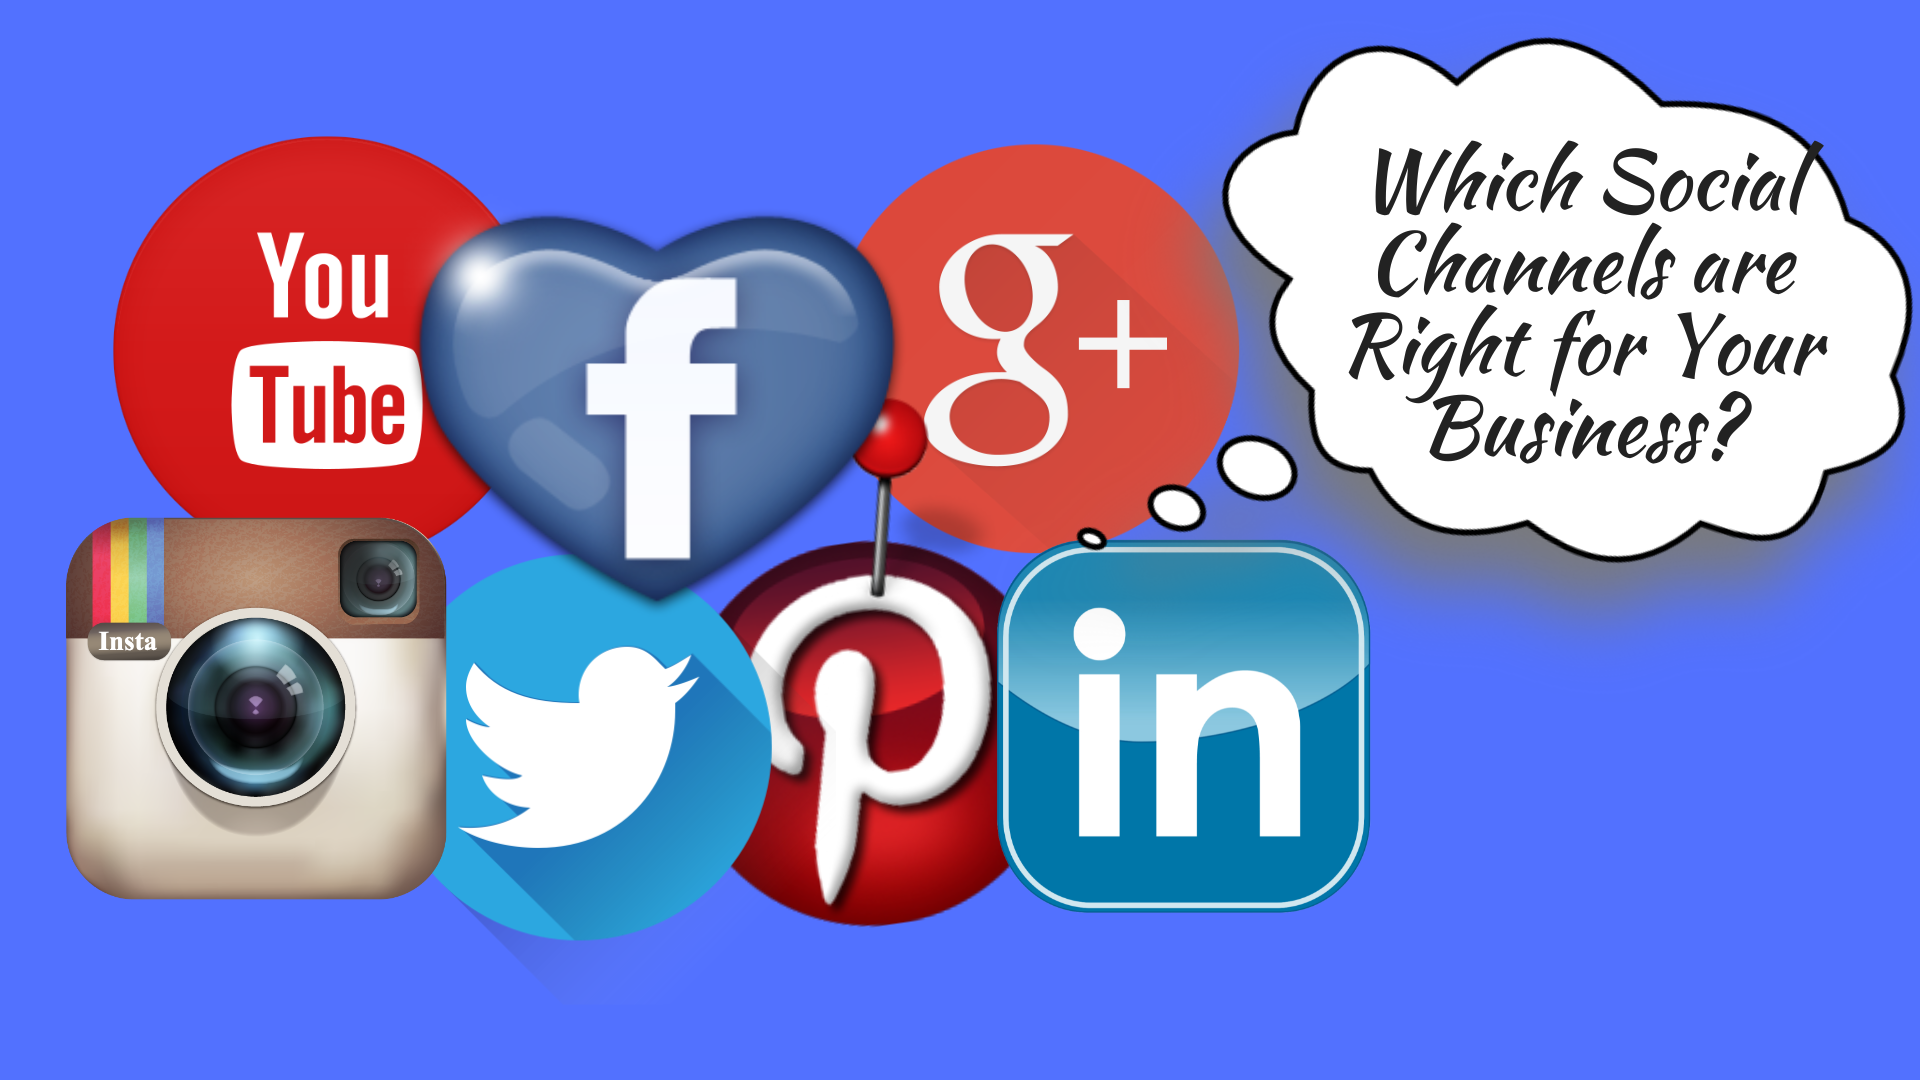 "Program Two: Which Social Channels are Right for Your Business?"